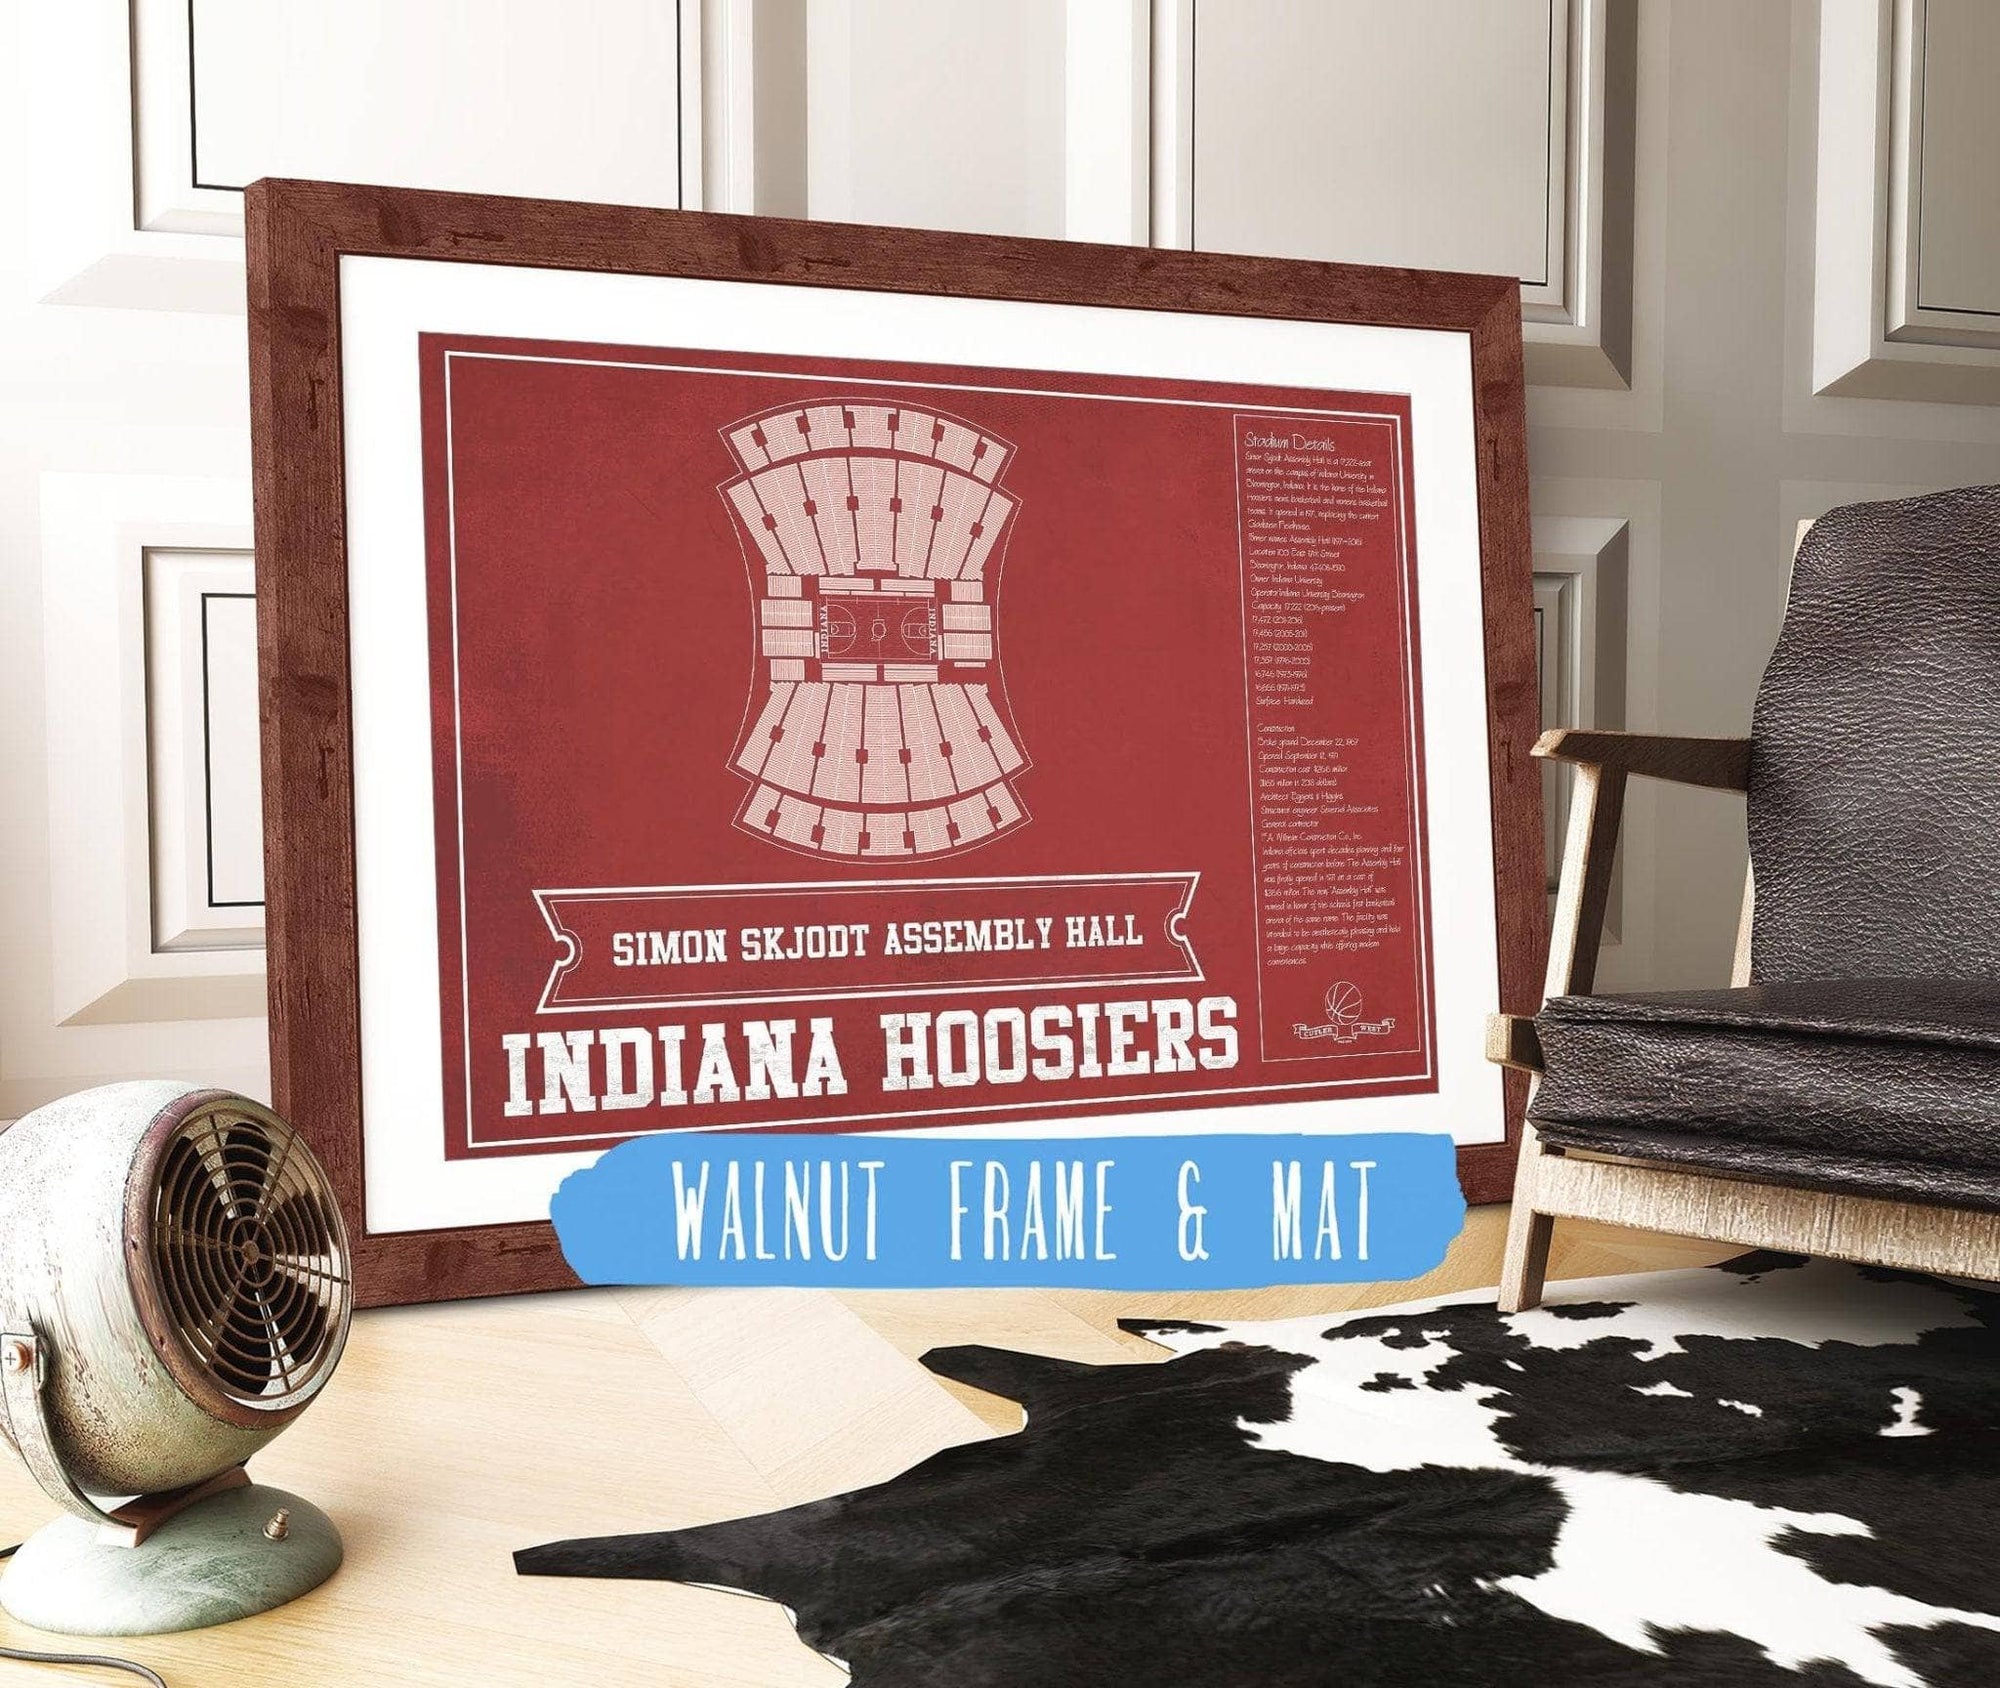 Cutler West Basketball Collection 14" x 11" / Walnut Frame & Mat Simon Skjodt Assembly Hall Indiana Hoosiers Team Color NCAA Vintage Print 933350232_83364